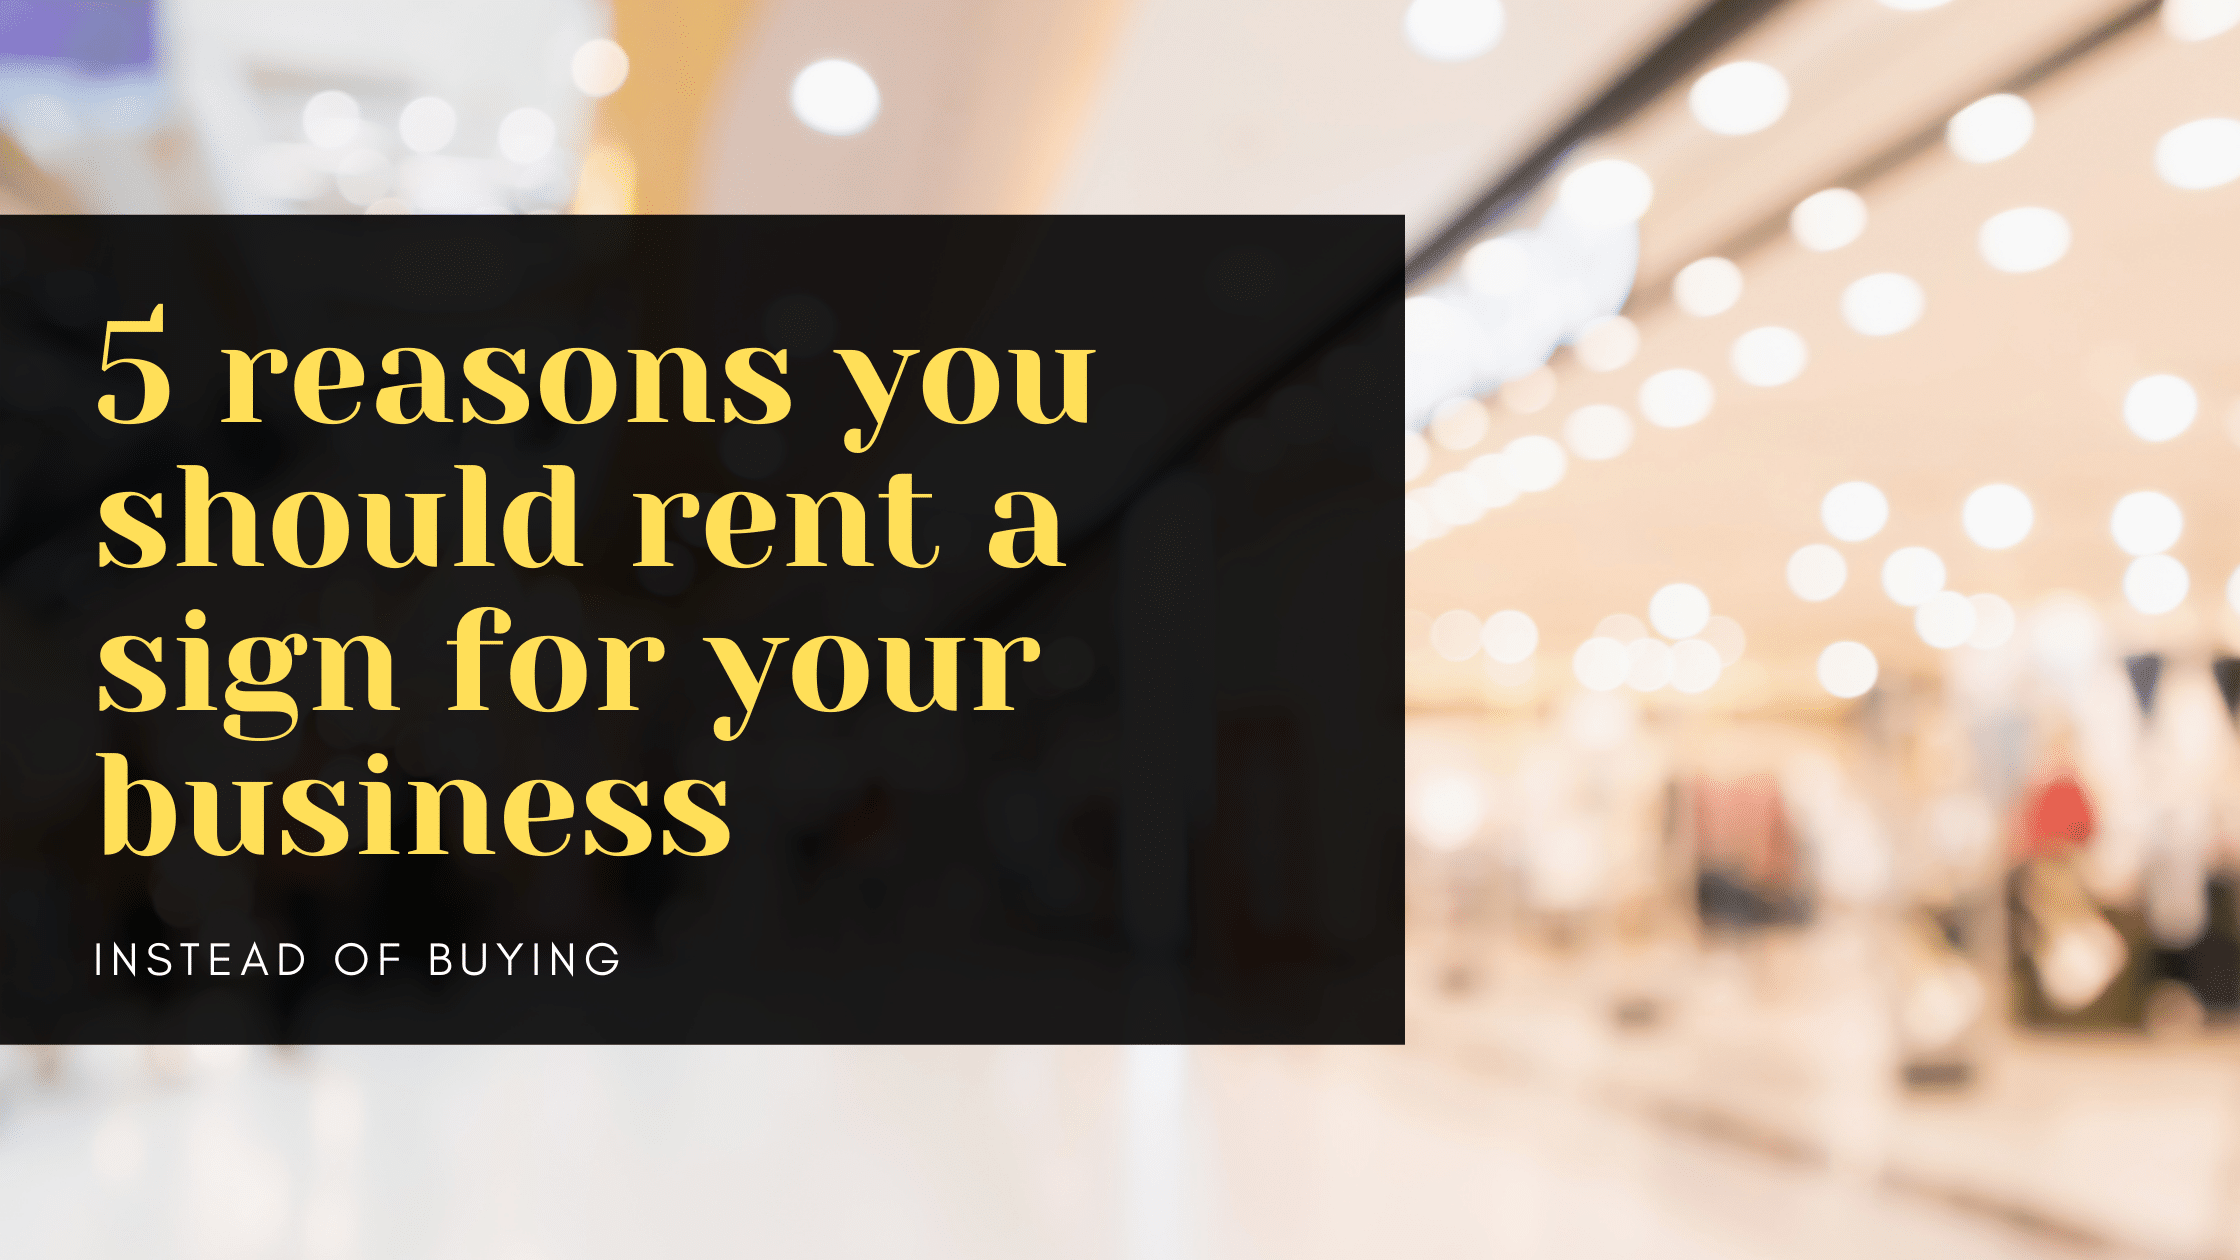 the words “5 reasons you should rent a sign for your business instead of buying” appear in a black box hovering over a blurry image of an indoor shopping mall.